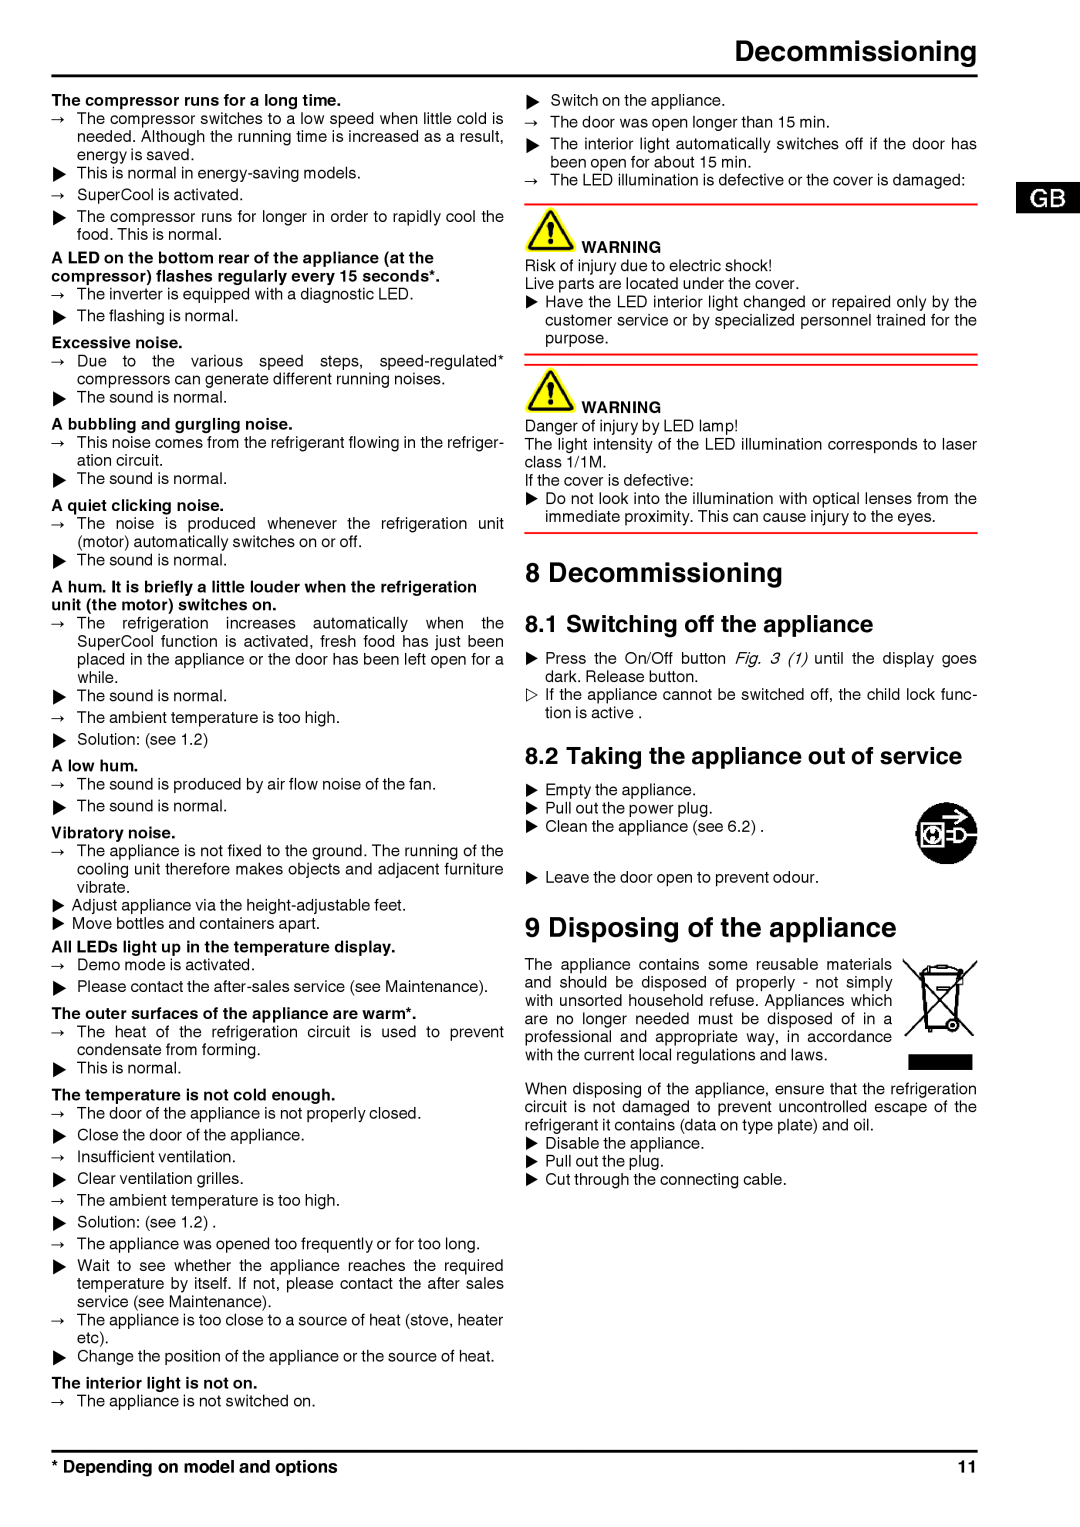 Liebherr 7085638-01 operating instructions Decommissioning, Disposing of the appliance, Switching off the appliance 